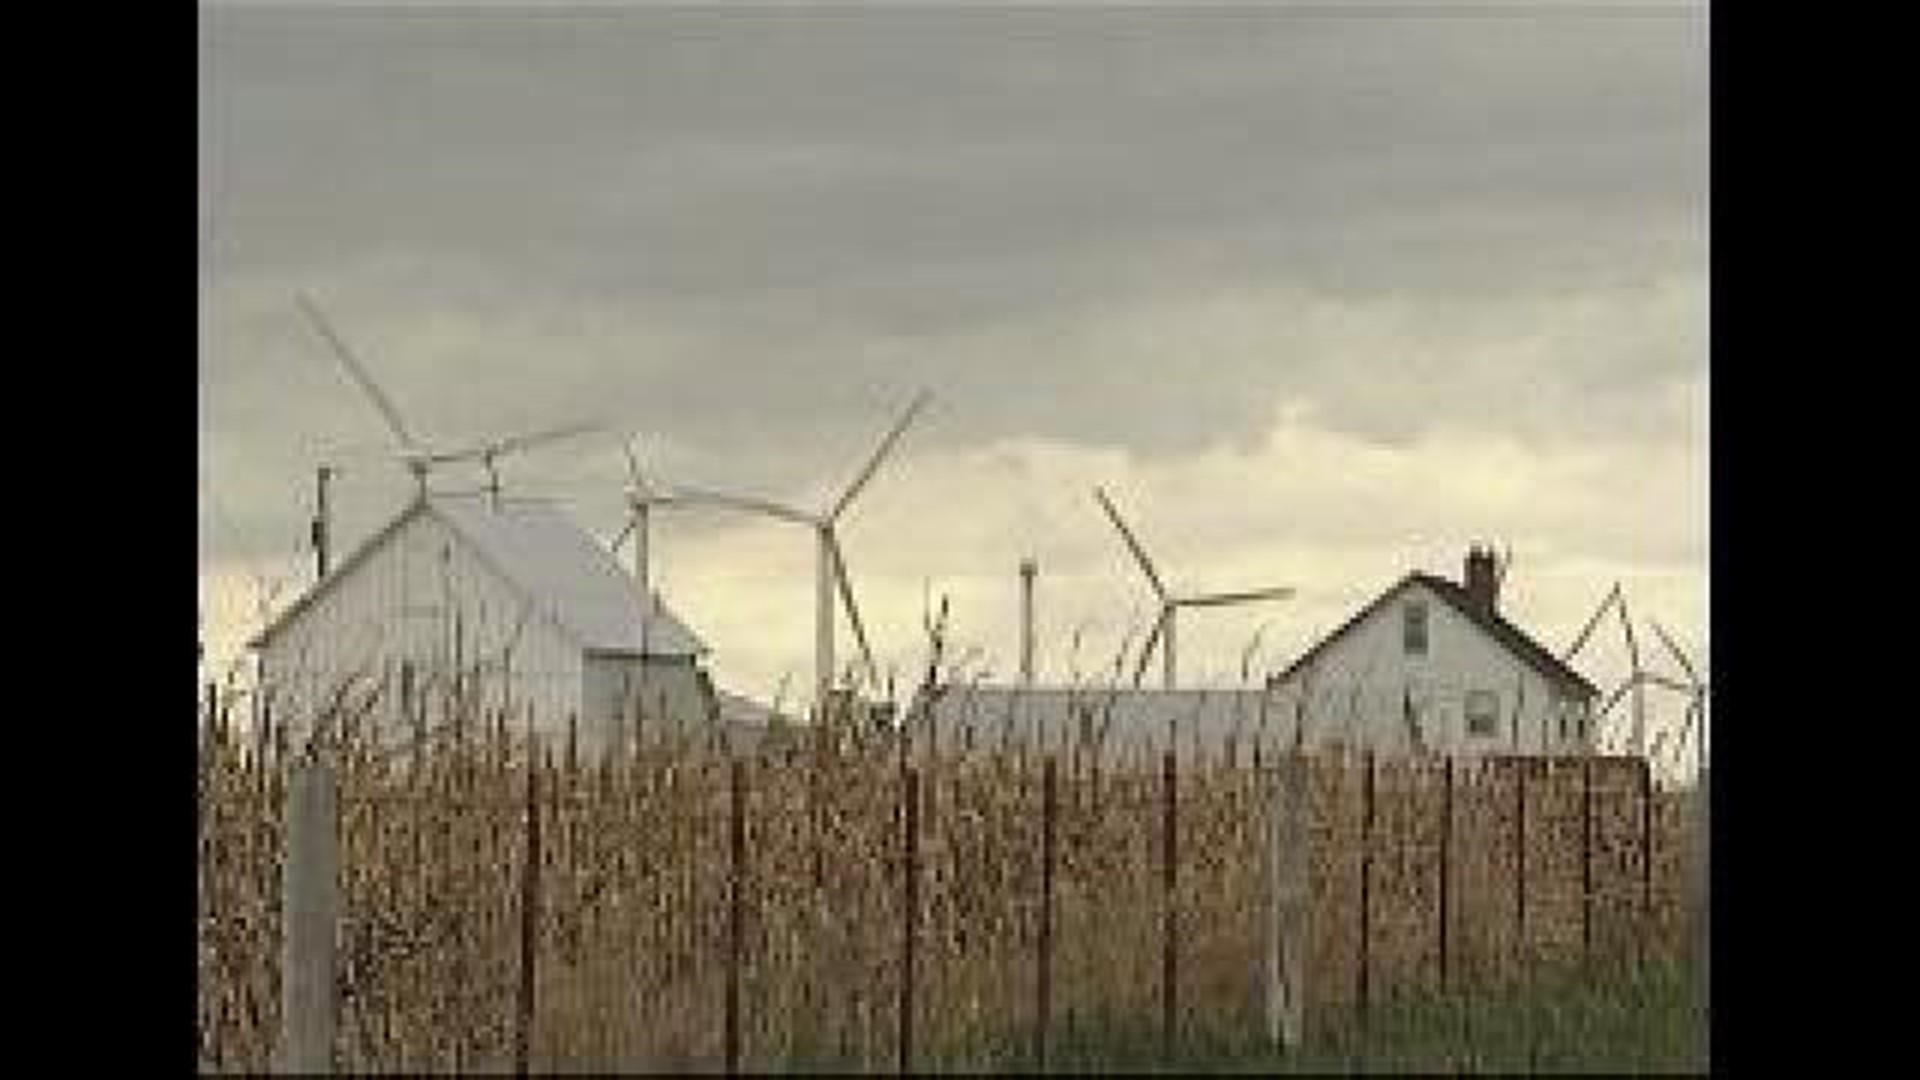 Possible Jobs Head to River Valley With Wind Turbine Project